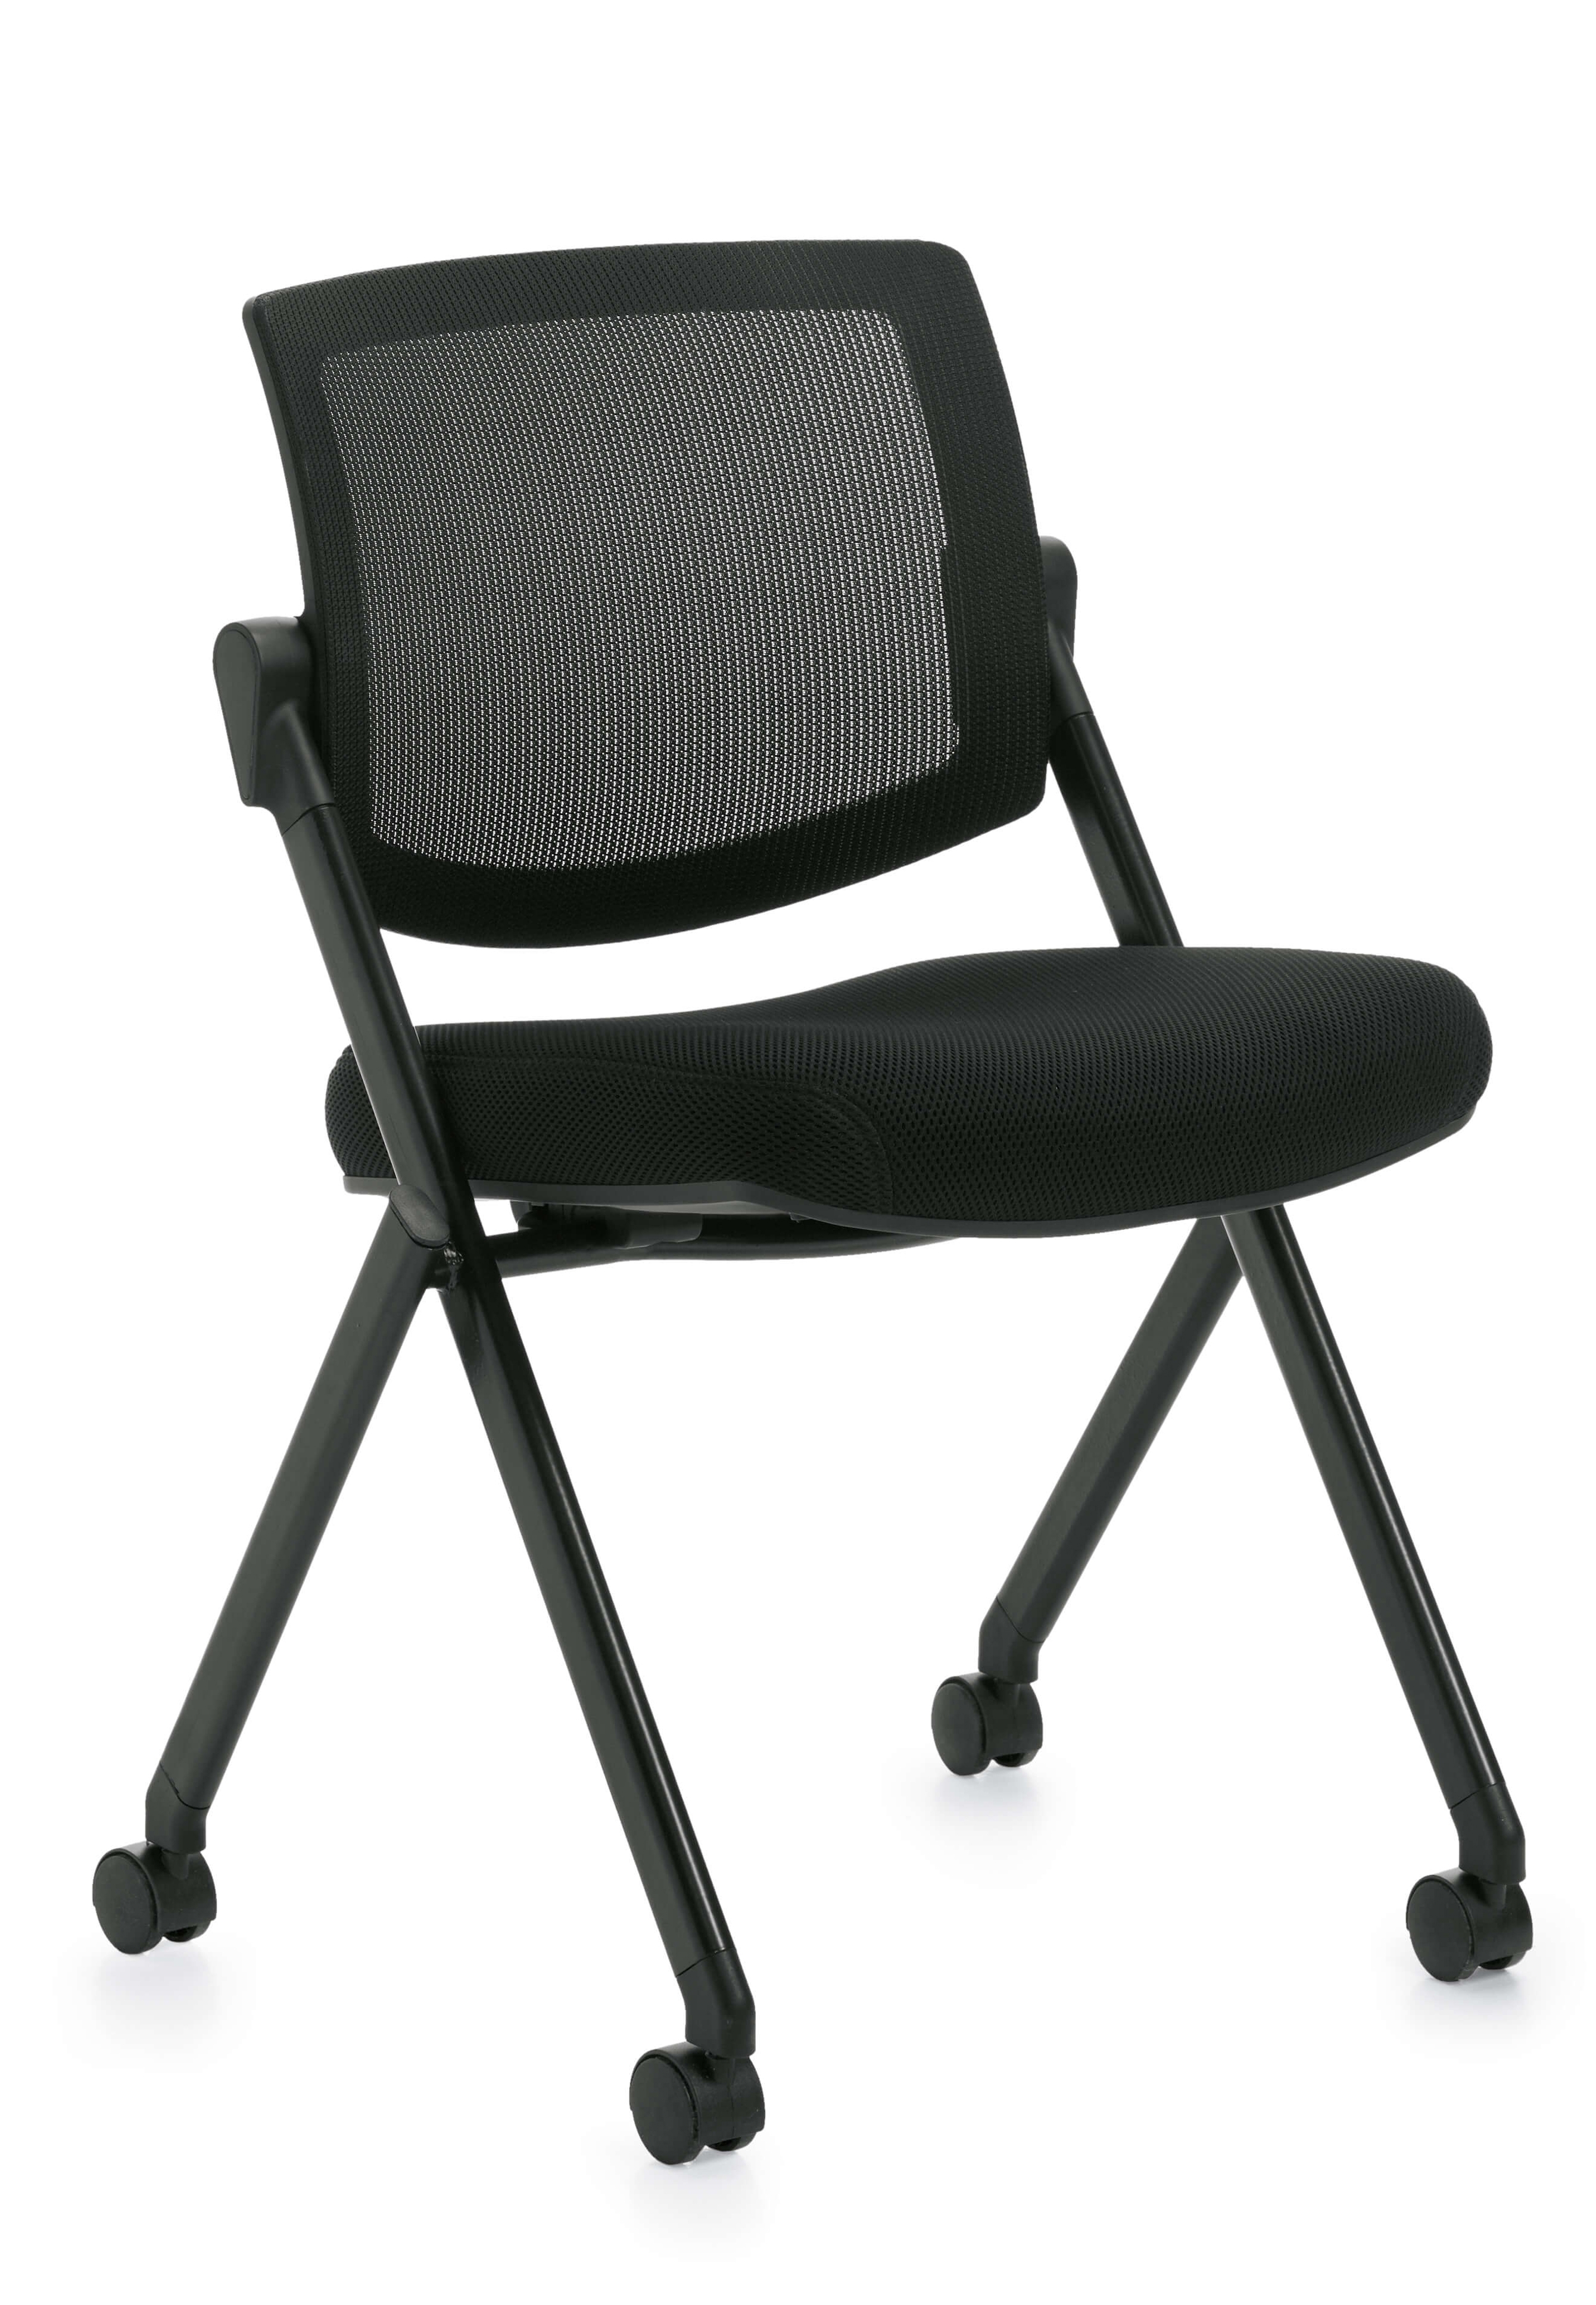 office-waiting-room-chairs-armless-office-chairs.jpg